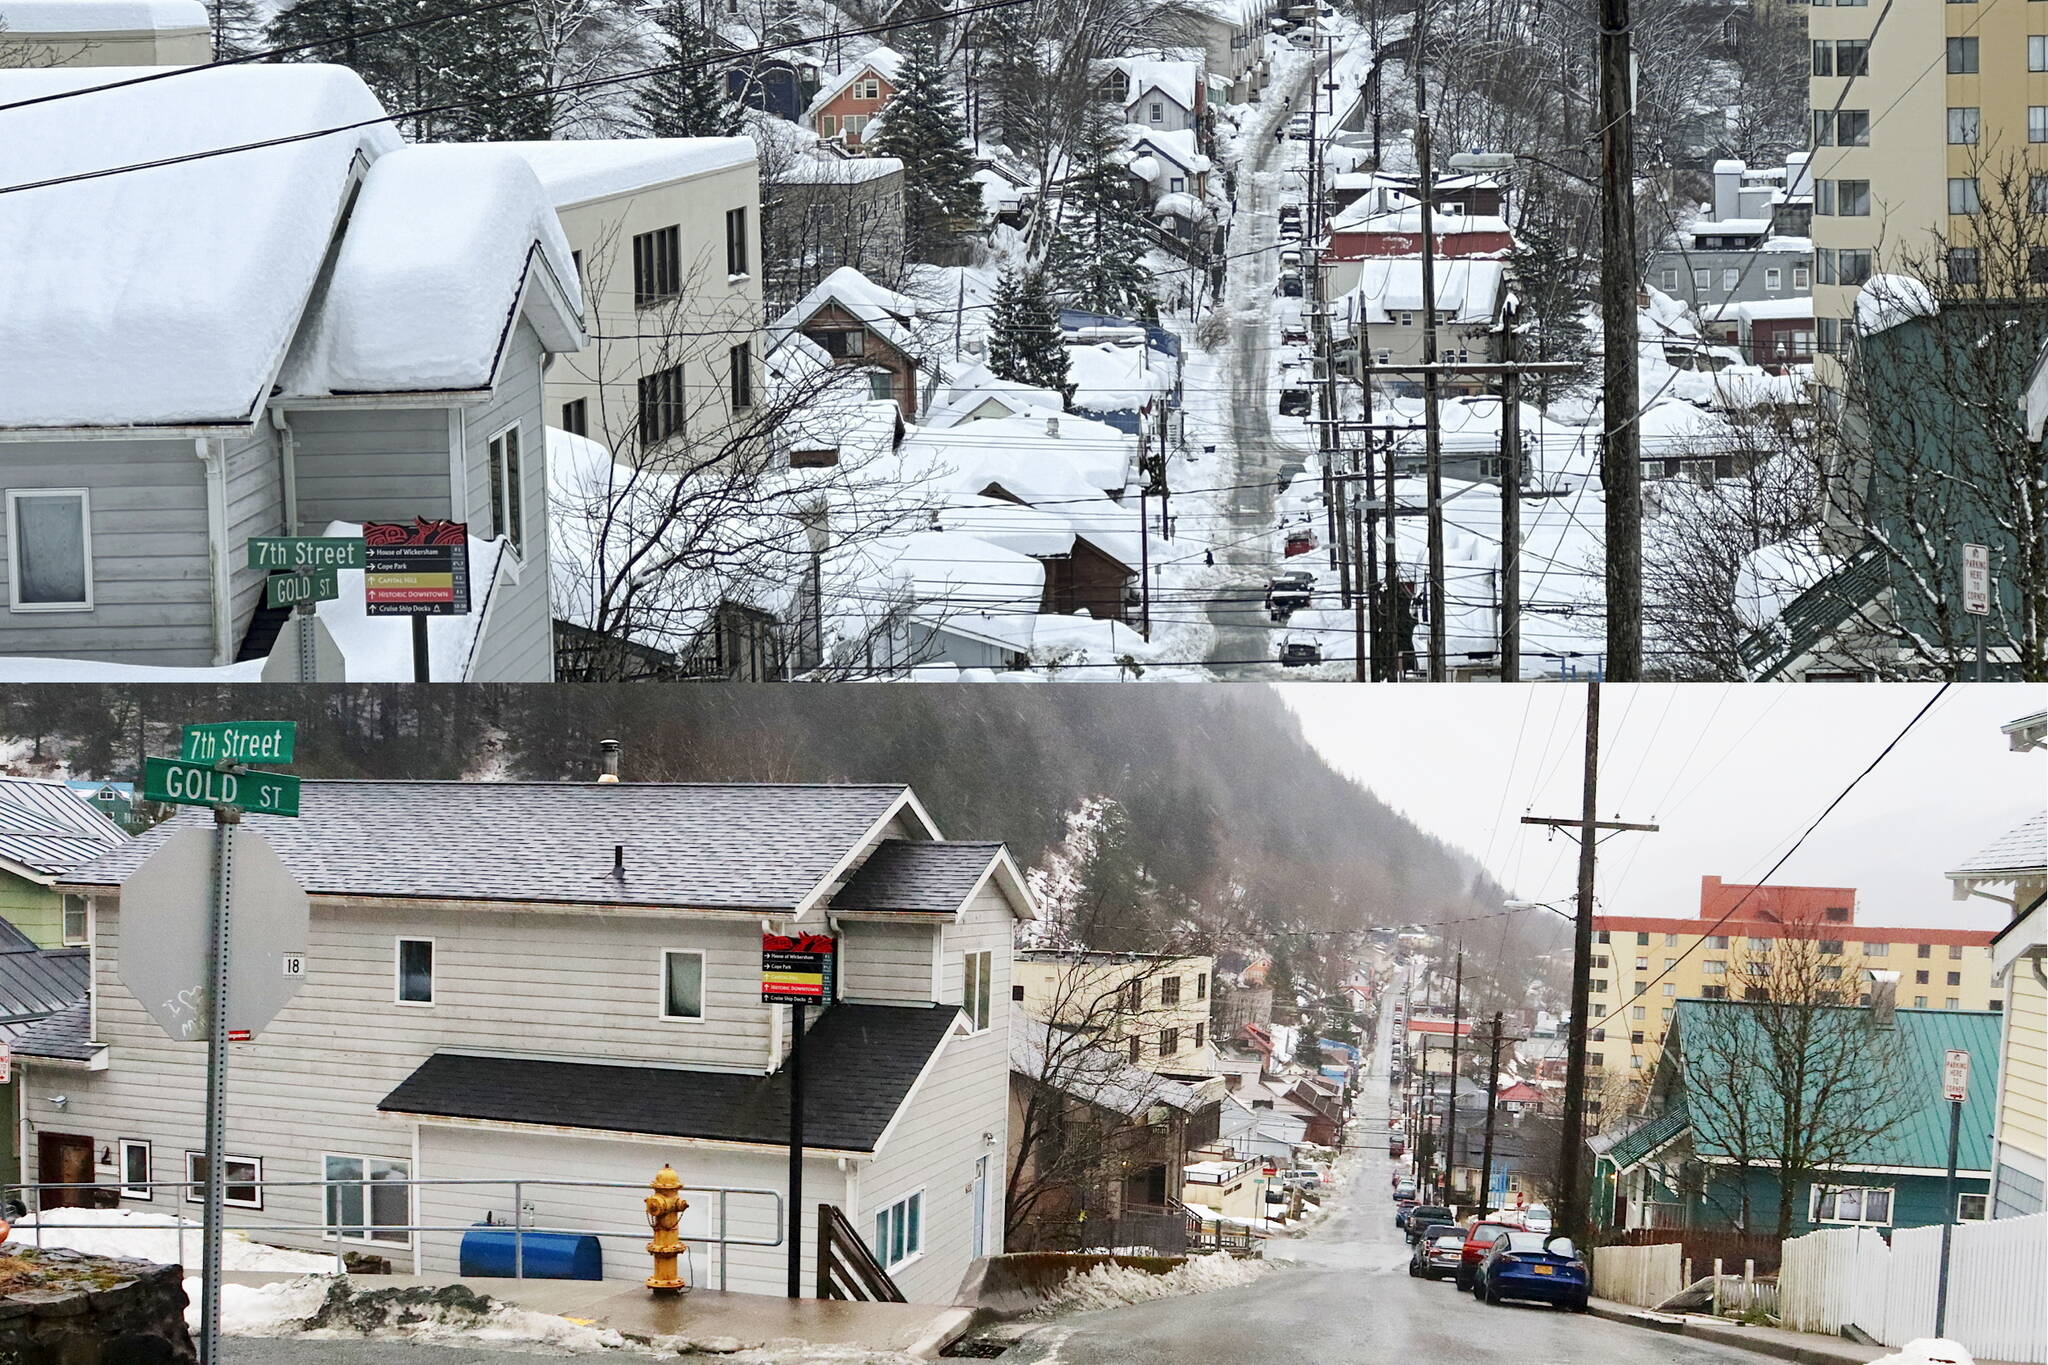 Above, a downtown Juneau street on Wednesday, Jan. 24, following two large snowstorms during the previous 10 days. Below, the same street at midday Monday after record-high temperatures and heavy rain dissolved most of the accumulated snow in many parts of town. (Above photo by Becky Bohrer / Associated Press; below photo by Mark Sabbatini / Juneau Empire)